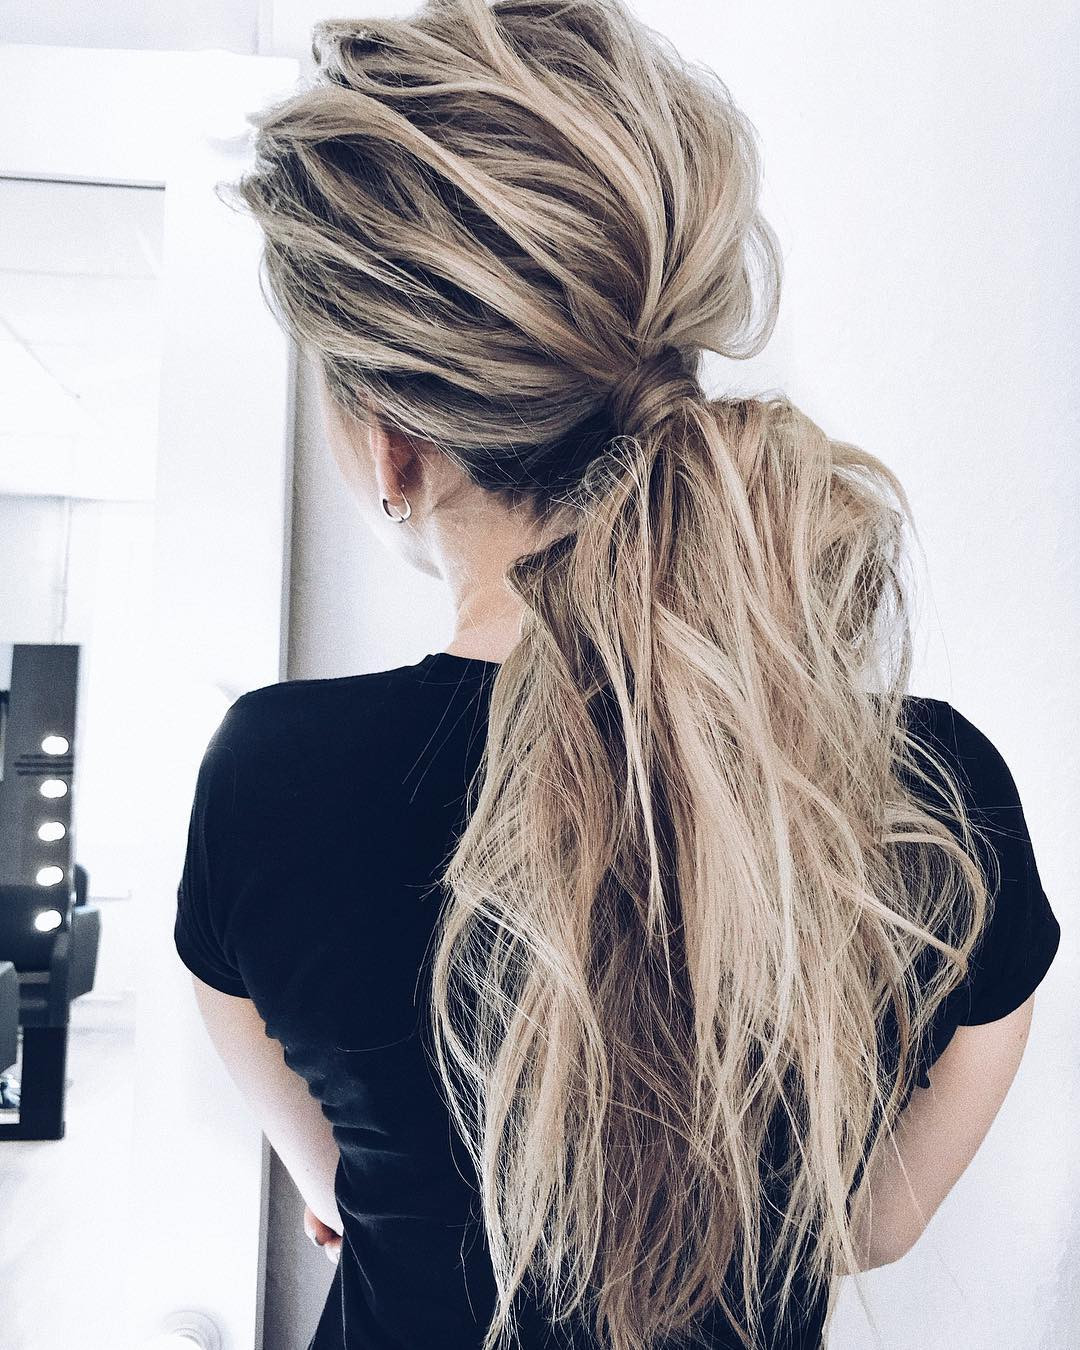 Super Cool Hairstyles
 10 Creative Ponytail Hairstyles for Long Hair Summer